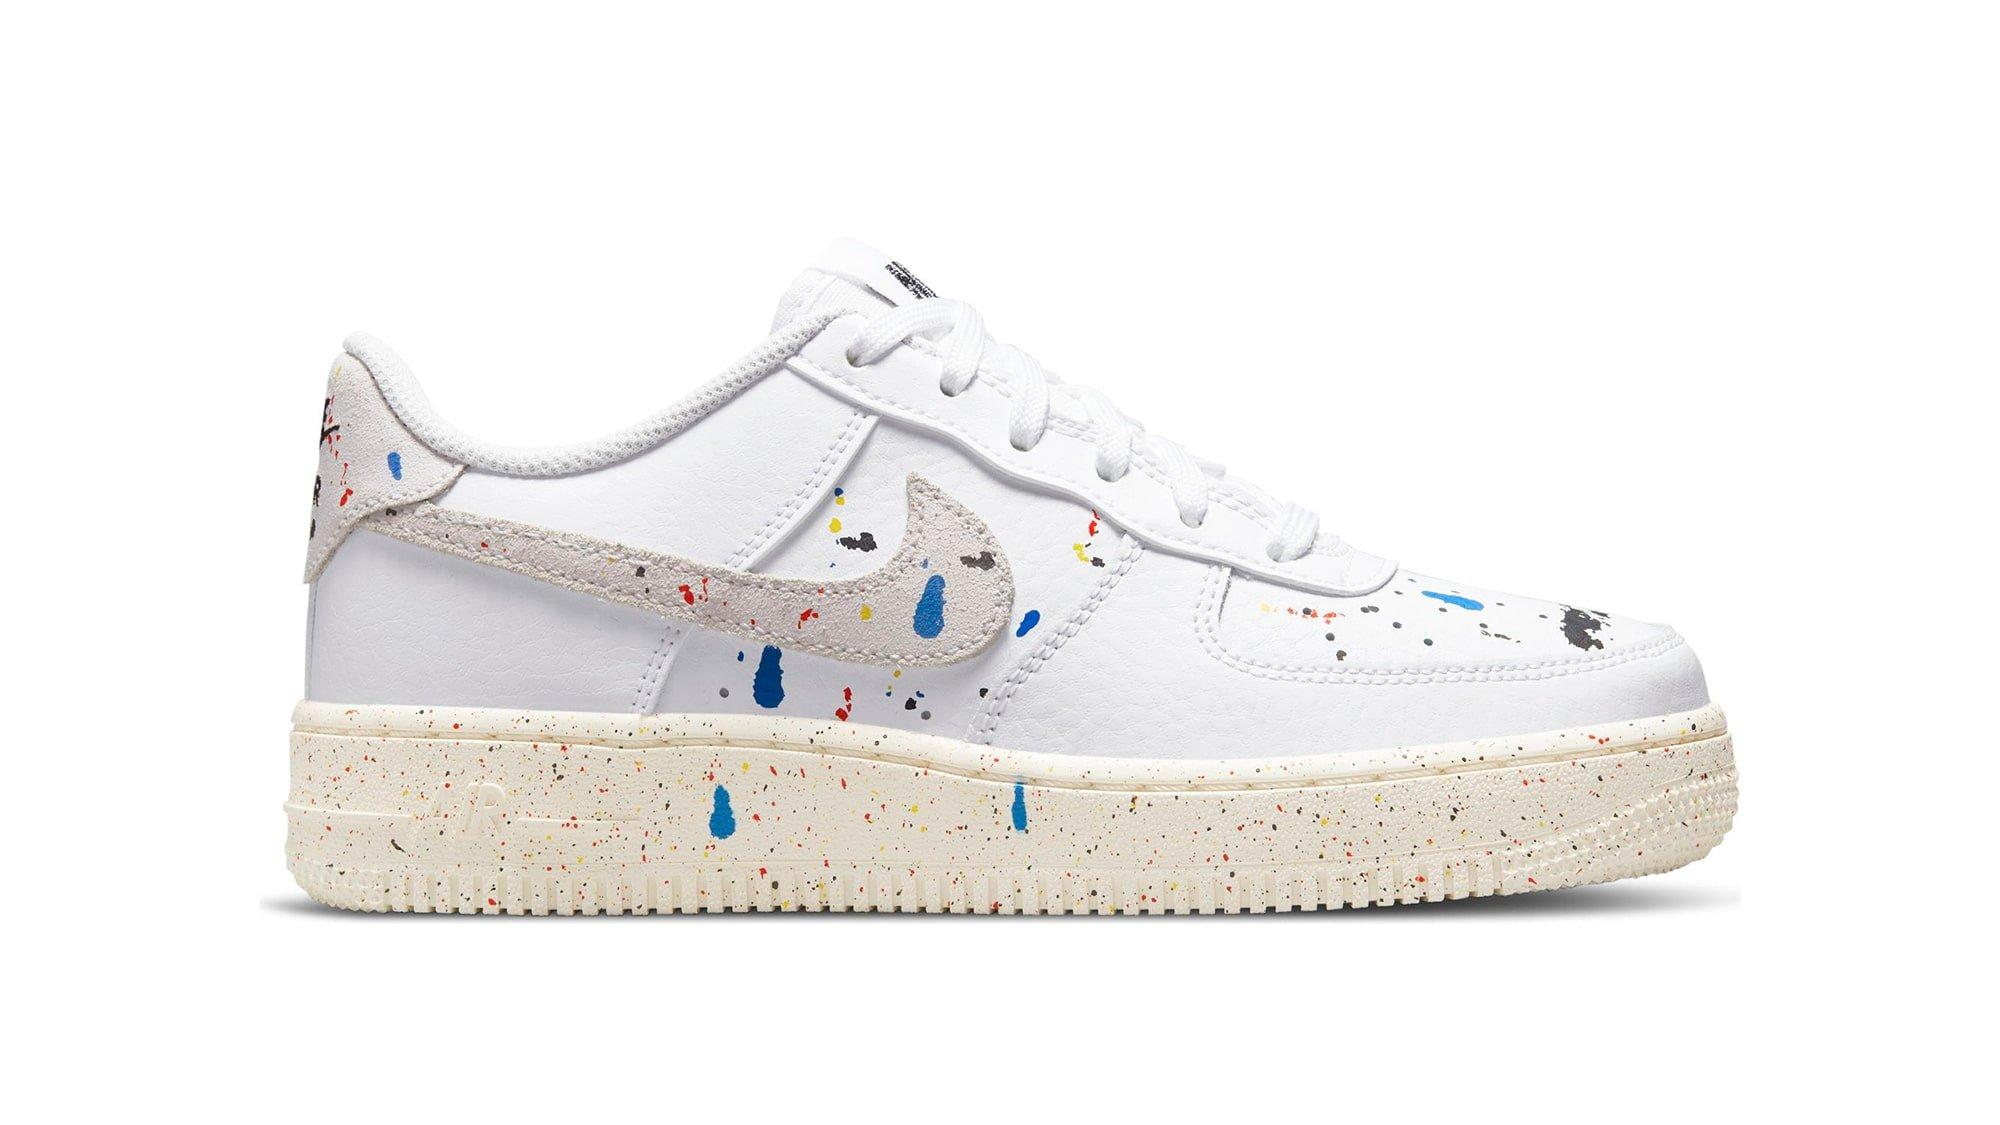 Nike Air Force 1 '07 LV8 Paint Splatter Casual Shoes